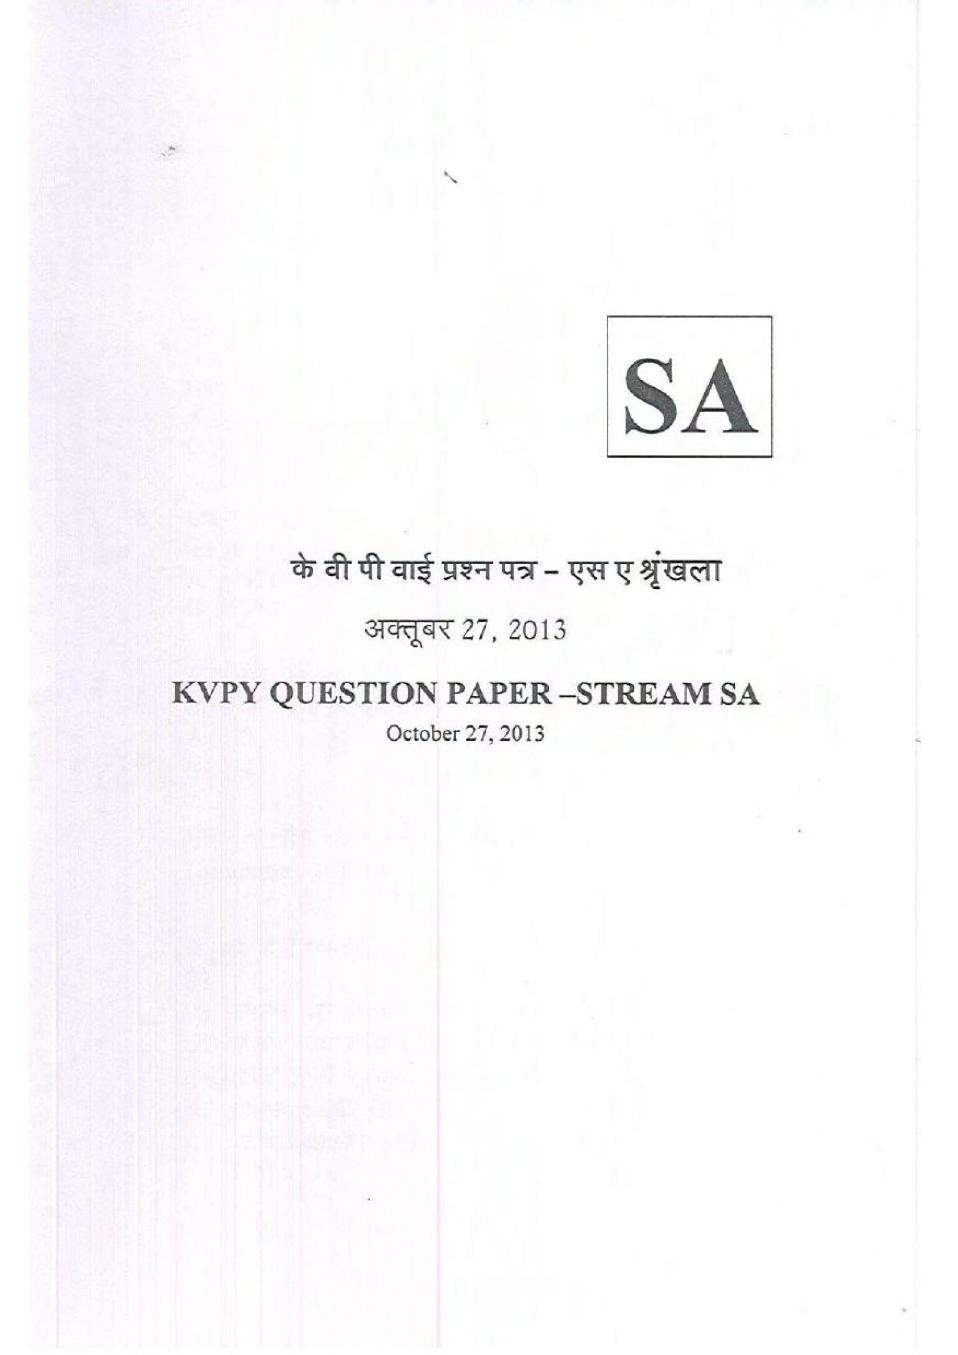 KVPY 2013 Question Paper with Answer Key for SA Stream (Hindi Version) - Page 1